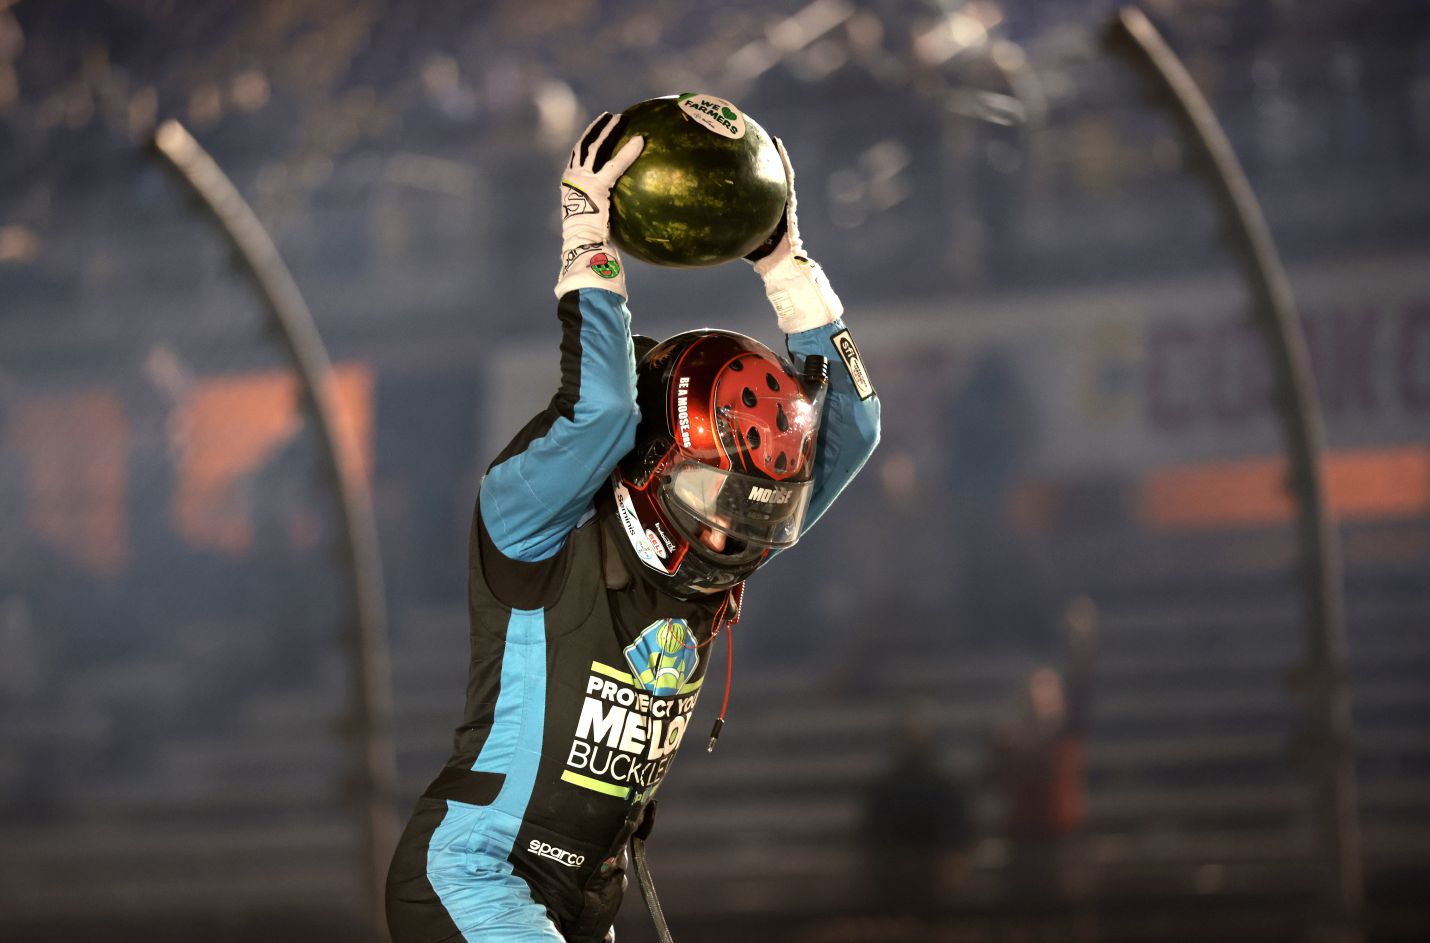 Ross Chastain claims victory at Darlington Raceway in NASCAR Overtime thriller